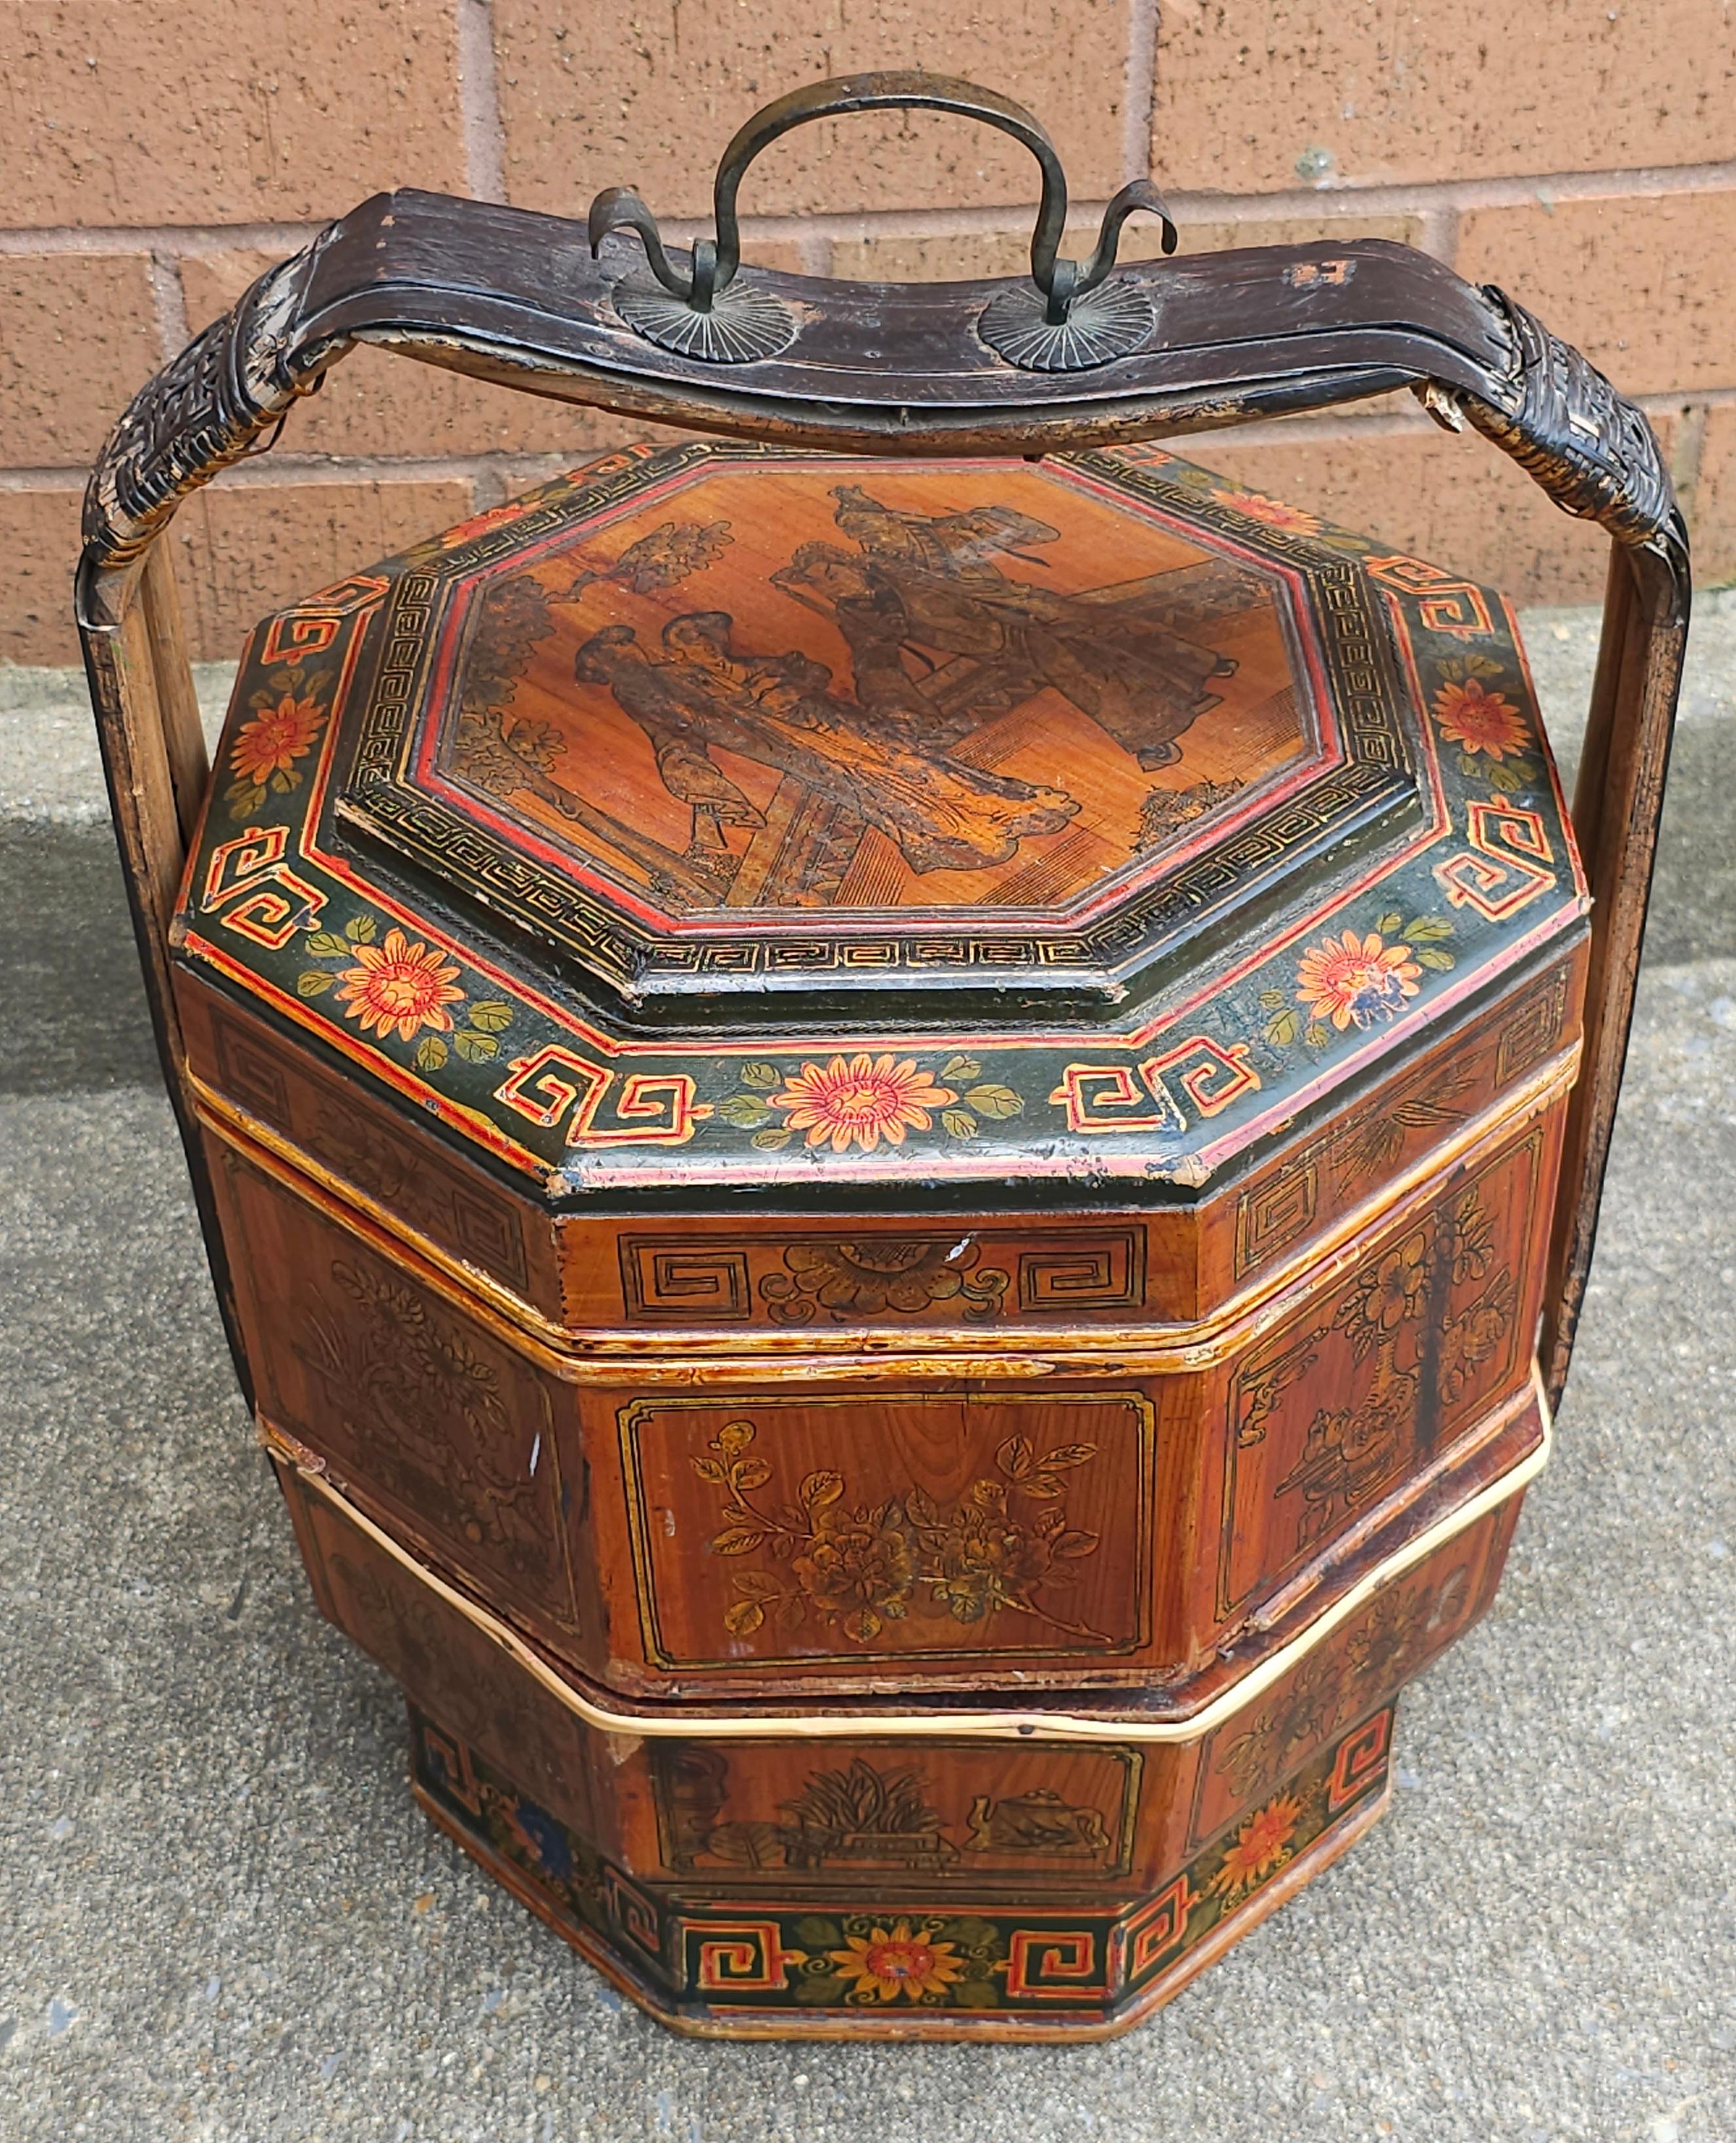 19th Century Asian Two-Tier Lacquered And Decorated Handled and covared Basket.